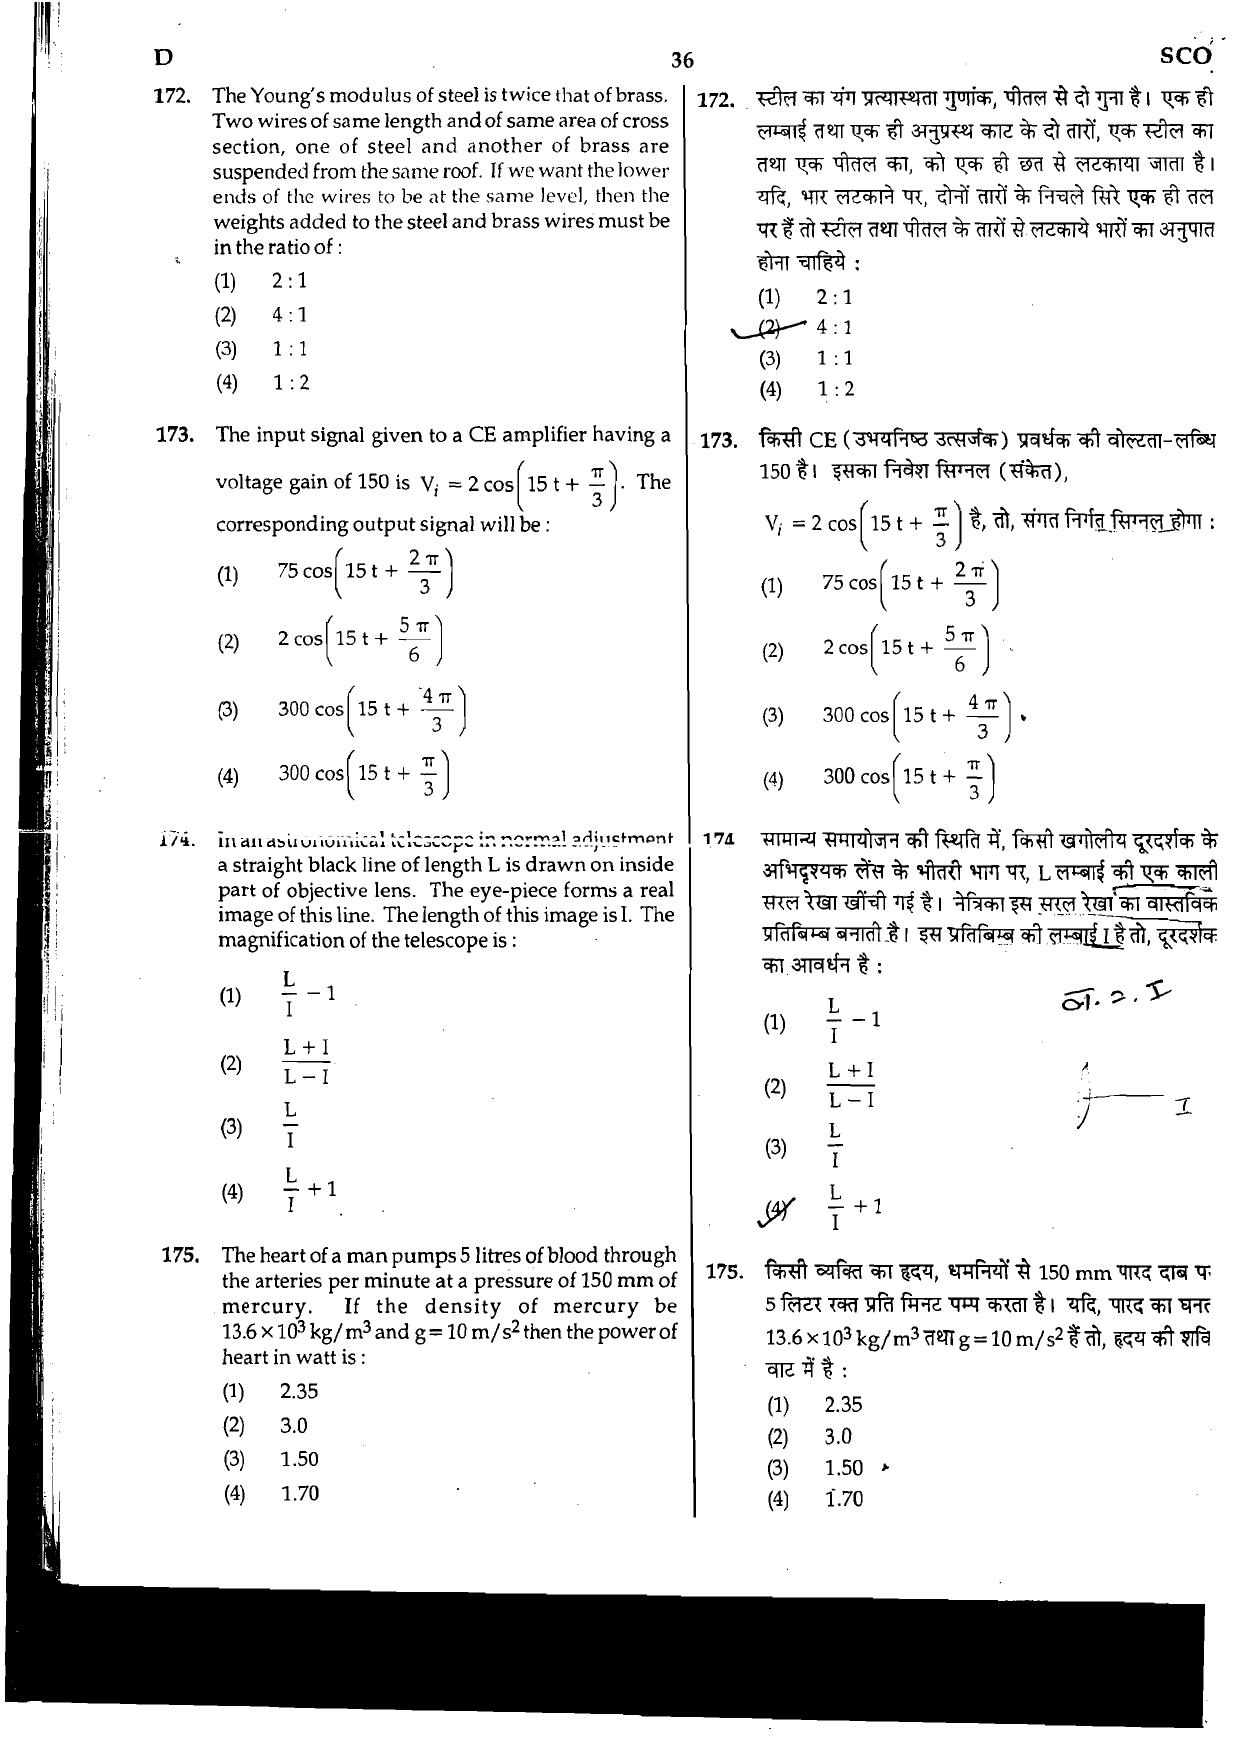 NEET Code D 2015 Question Paper - Page 36